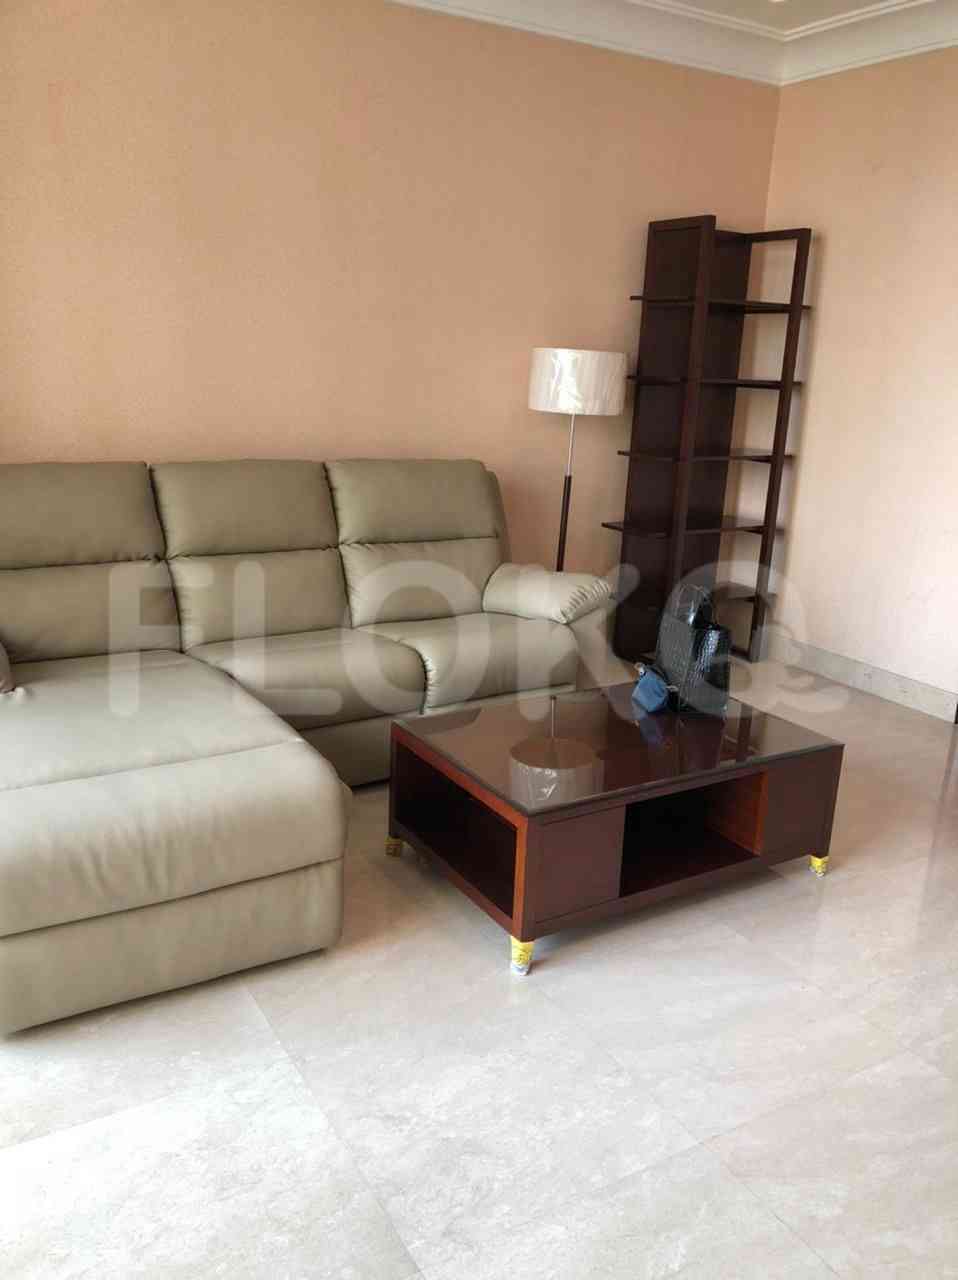 2 Bedroom on 9th Floor for Rent in Pakubuwono View - fga42e 1